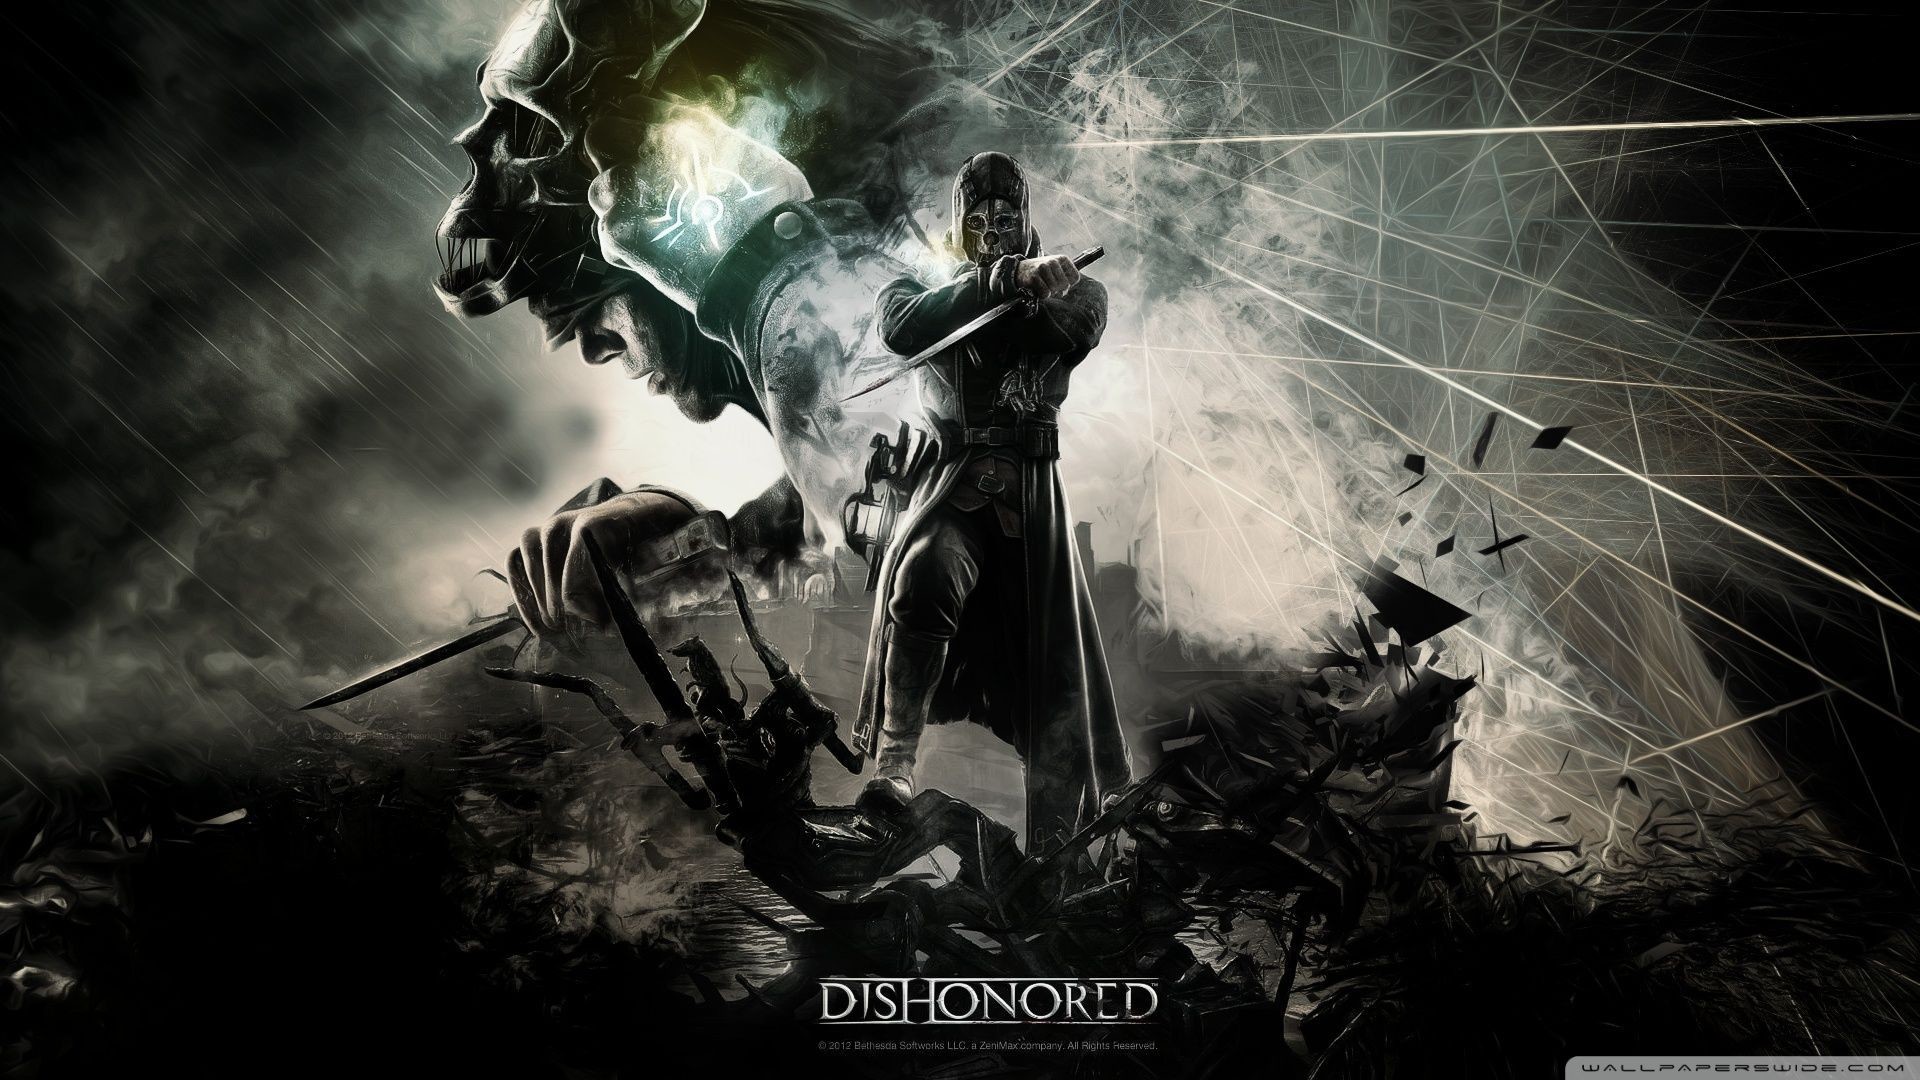 1920x1080 HD Quality Creative Dishonored Pictures,  px, Stephania Whidbee  for PC & Mac,